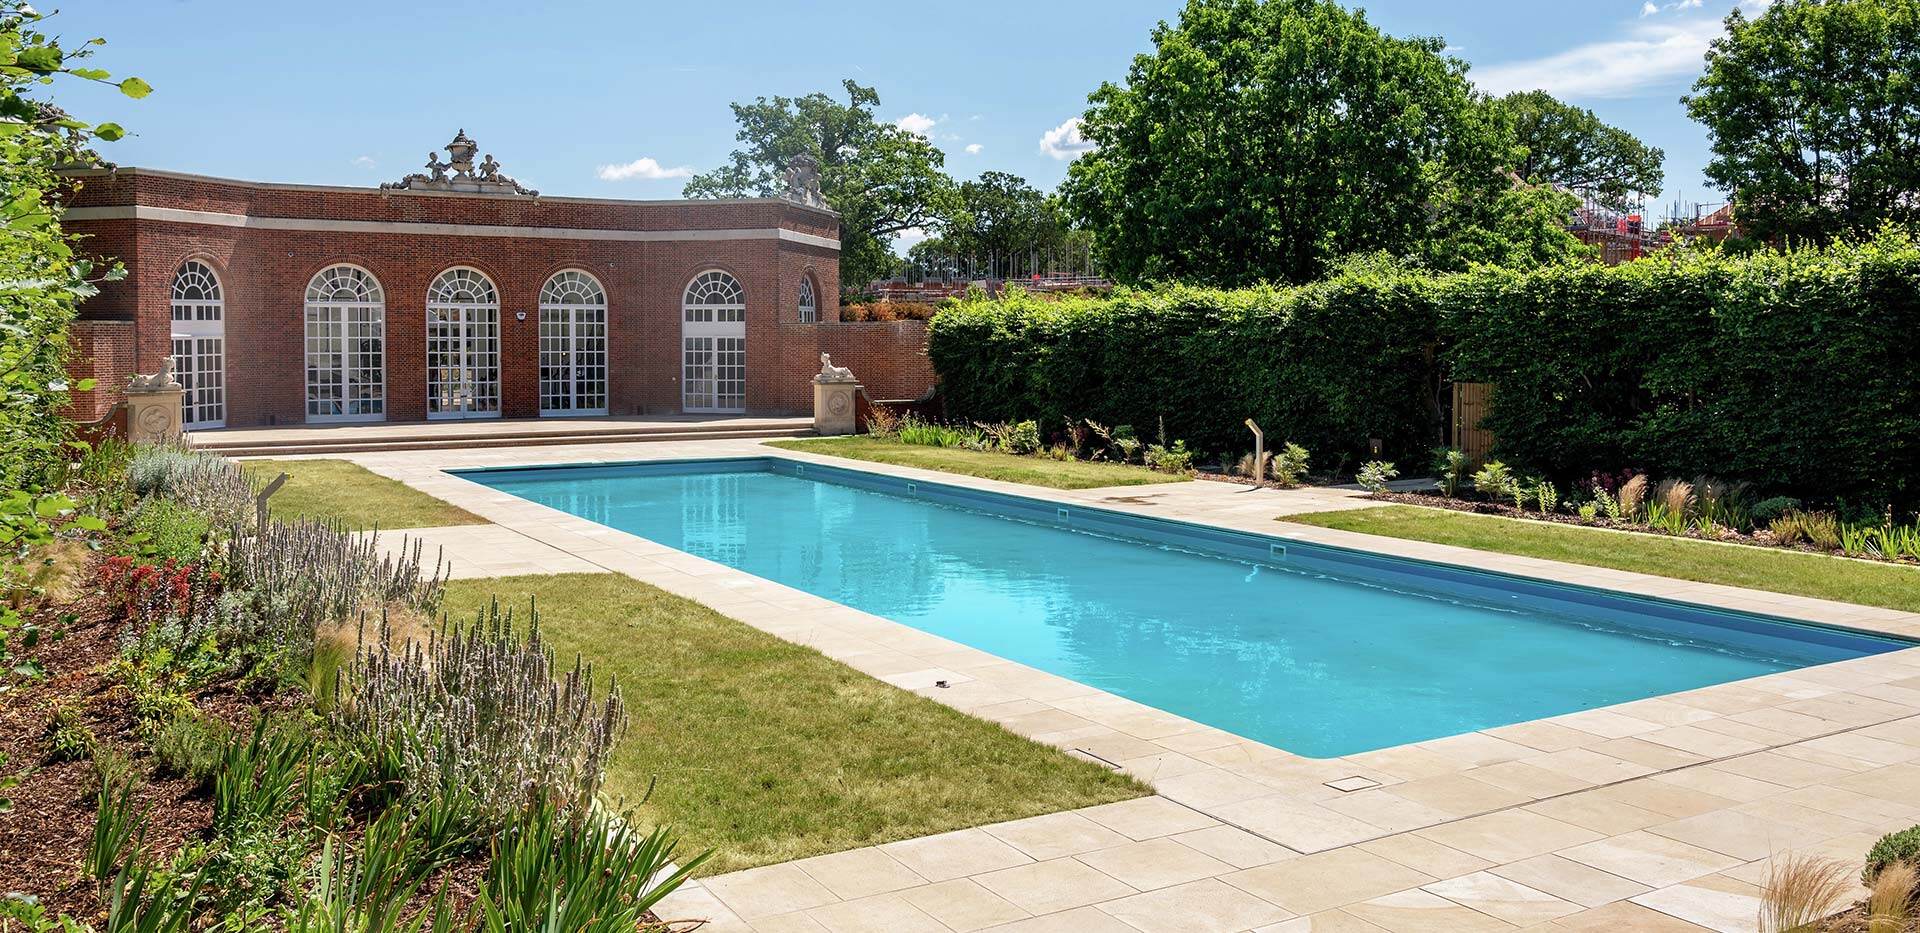 trent-park-the-lawn-club-swimming-pool-01